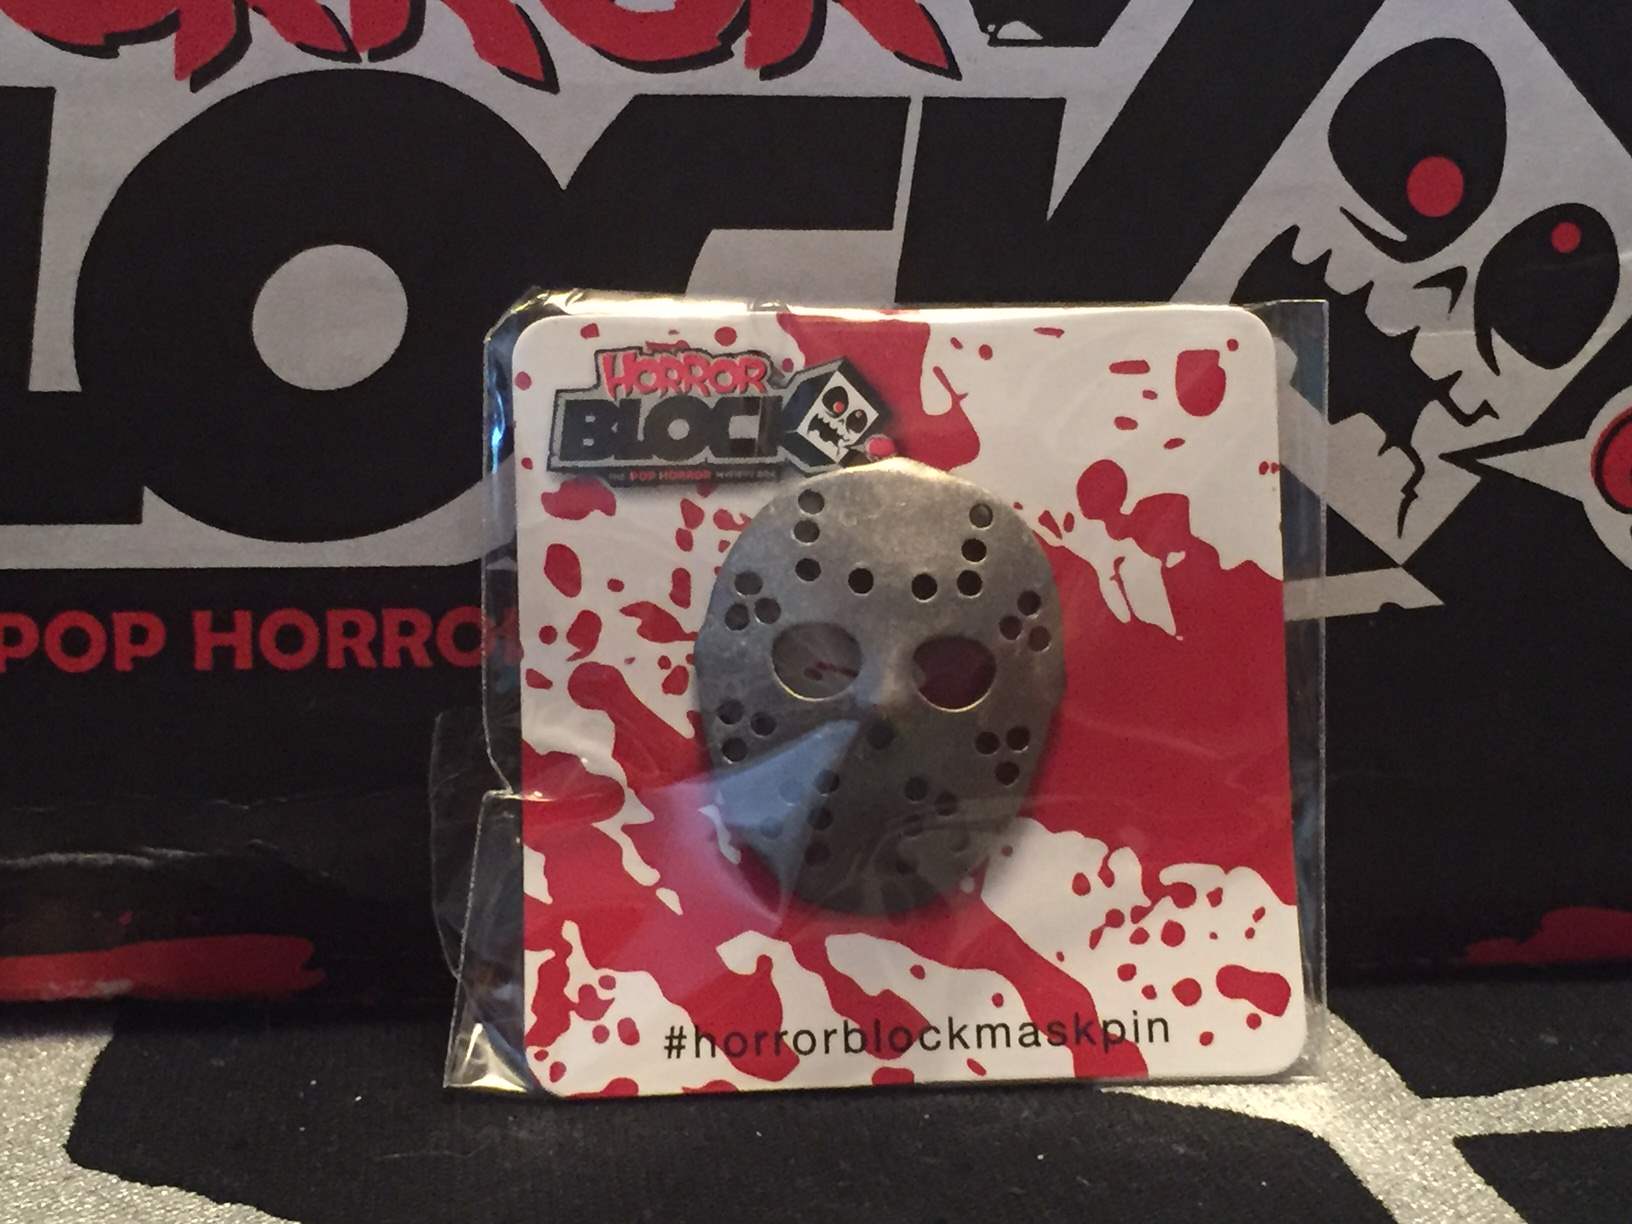 A silver hockey mask pin in the May 2016 Horror Block